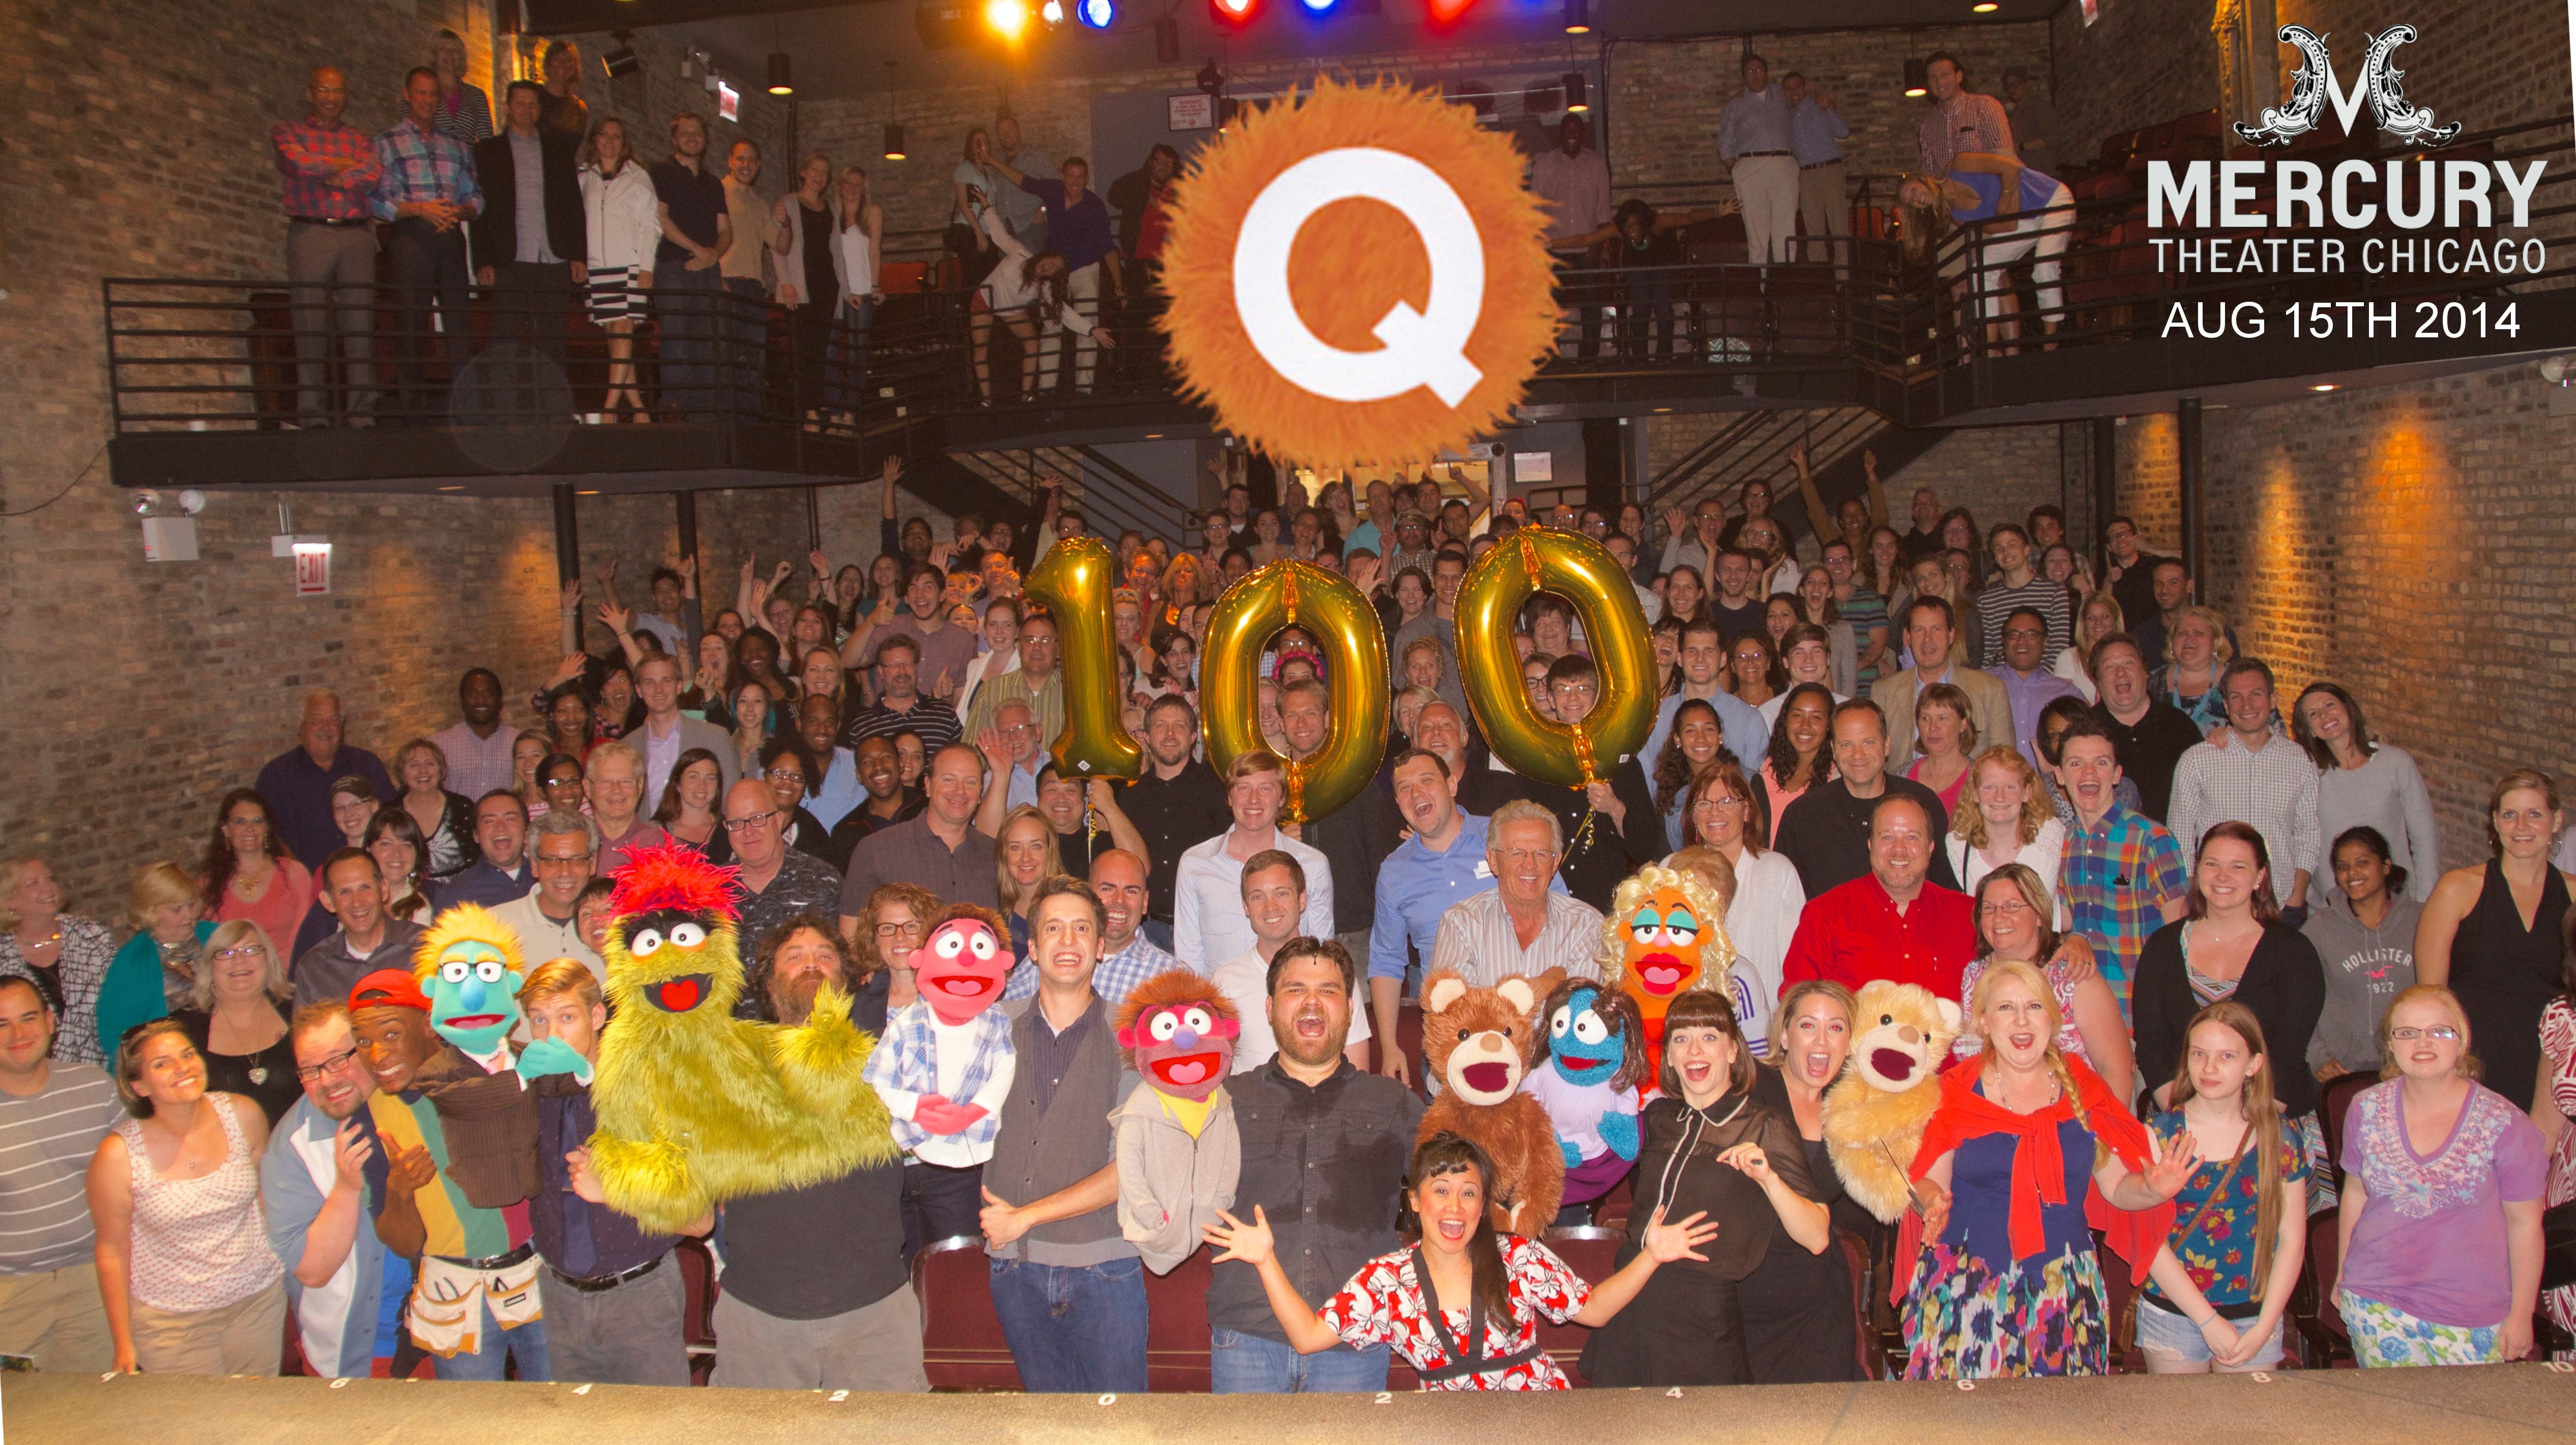 Mercury Theater's AVENUE Q Celebrates 100 Performances 1 AVENUE Q at Mercury Theater Chicago, 3745 N. Southport Avenue is thrilled to celebrate its 100th performance of the hilarious musical comedy, now playing through October 26, 2014. AVENUE Q continues to sell out and break all box office records at Mercury Theater Chicago. Chris Jones of the Chicago Tribune described the show as “delightfully sweet and vulnerable...could not be more fun or charming to watch!” and the Chicago Sun­Times Highly Recommends the show saying it’s “better than the Broadway original!” Winner of the Tony ‘Triple Crown’ for Best Musical, Best Score and Best Book, AVENUE Q is part flesh, part felt, and packed with heart. AVENUE Q is led by Jeff Award winners L. Walter Stearns (Director), Eugene Dizon (Musical Direction), and Kevin Bellie (Choreography) and features custom made puppets by Russ Walko.